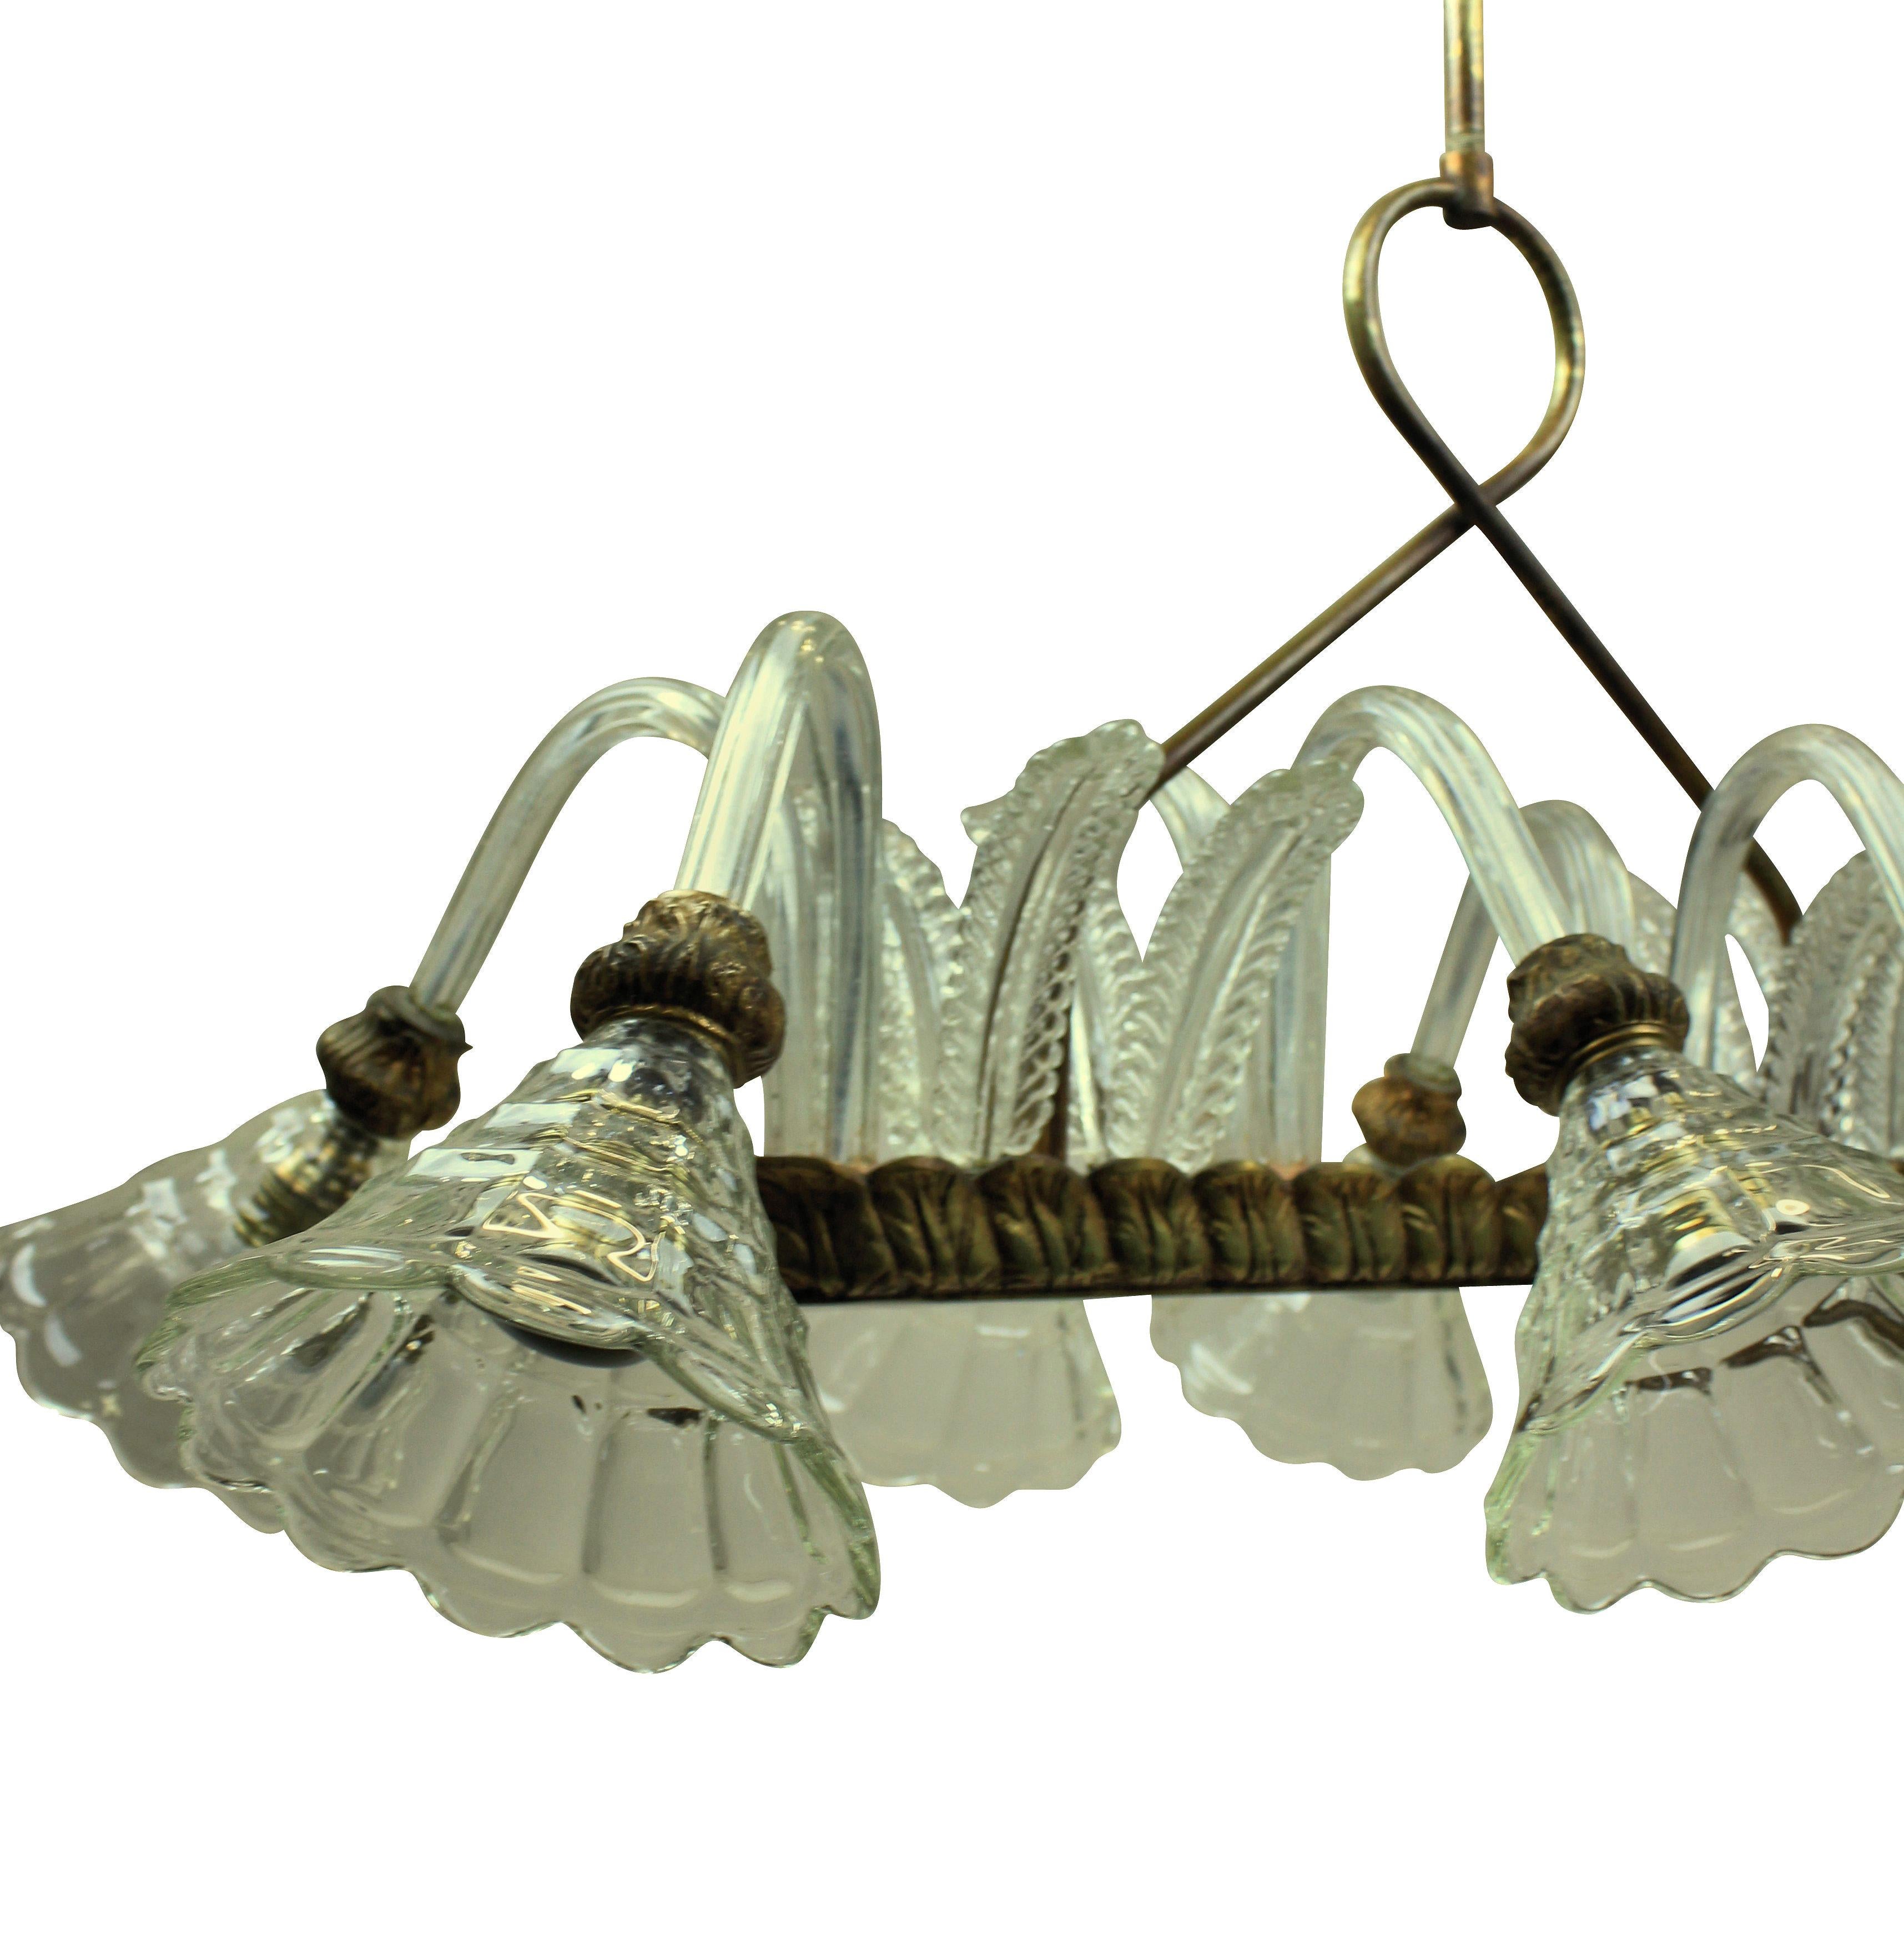 An eight-arm Barovier light of rectangular design. With hand blown leaves, arms and cups and brass fittings.